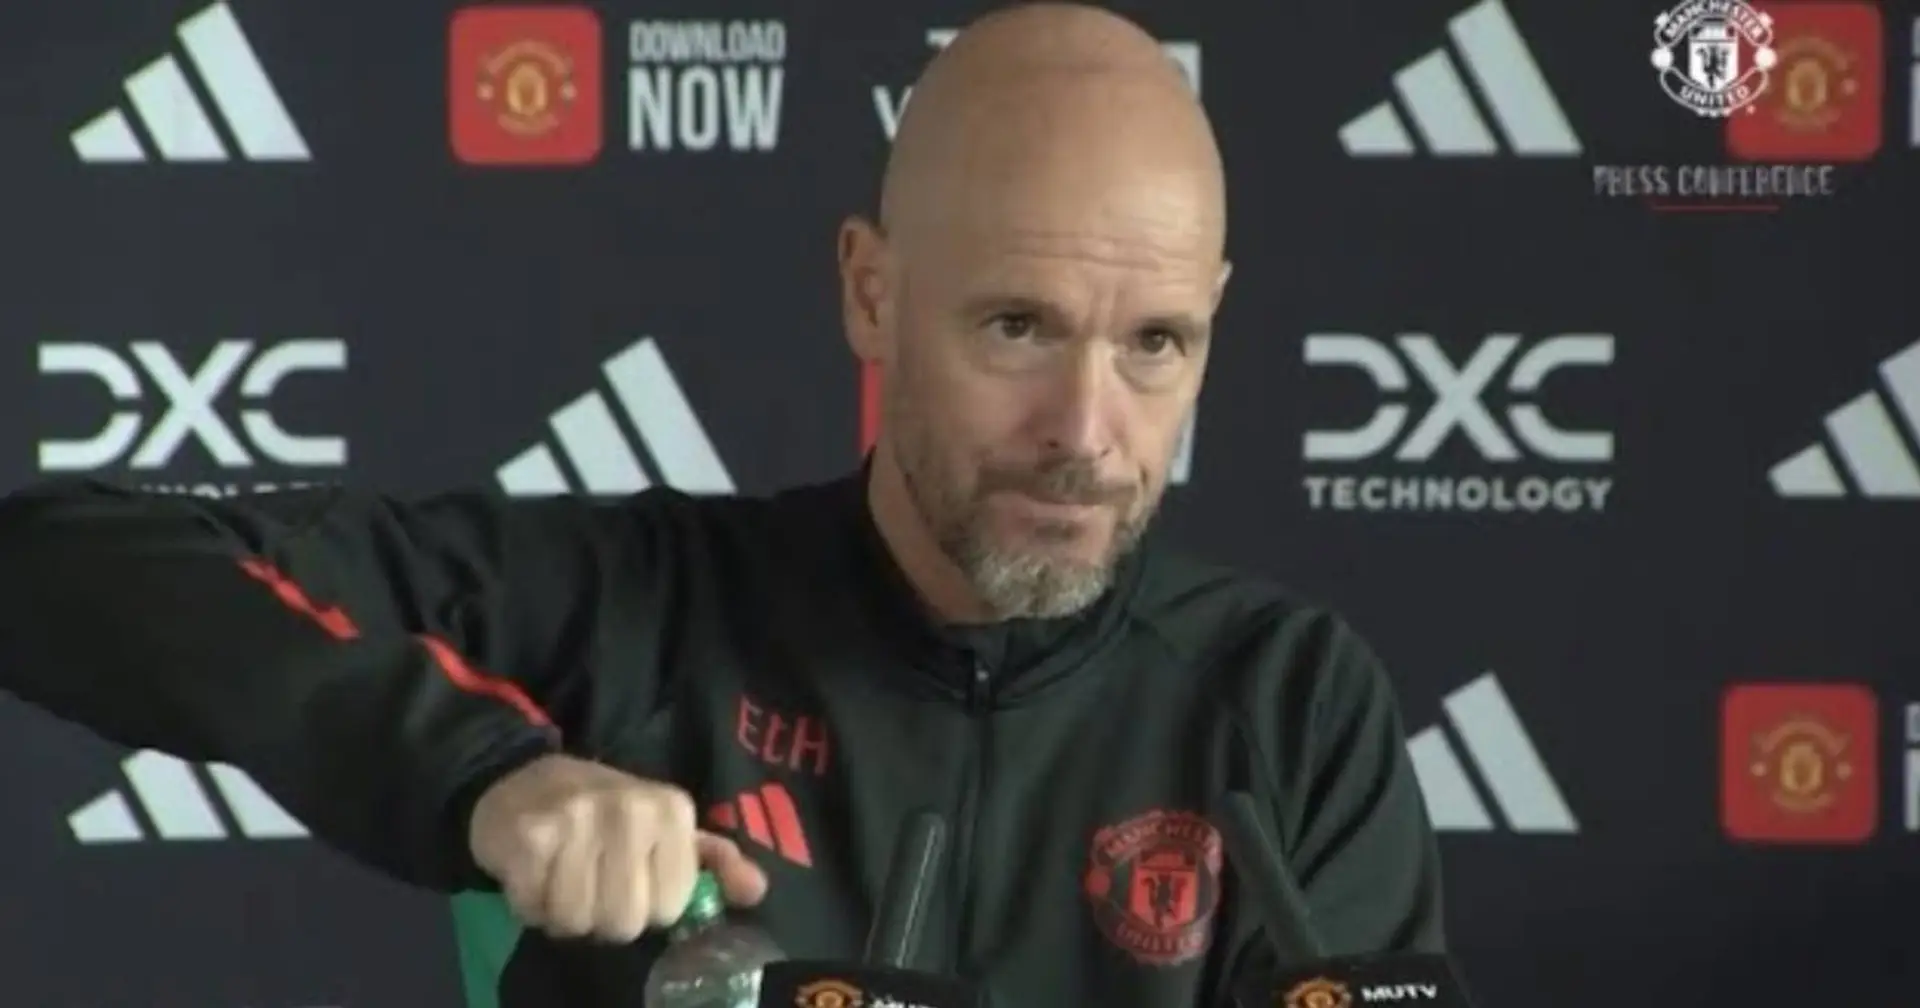 'No team can deal with so many injuries': Ten Hag suggests Man United have overachieved this season